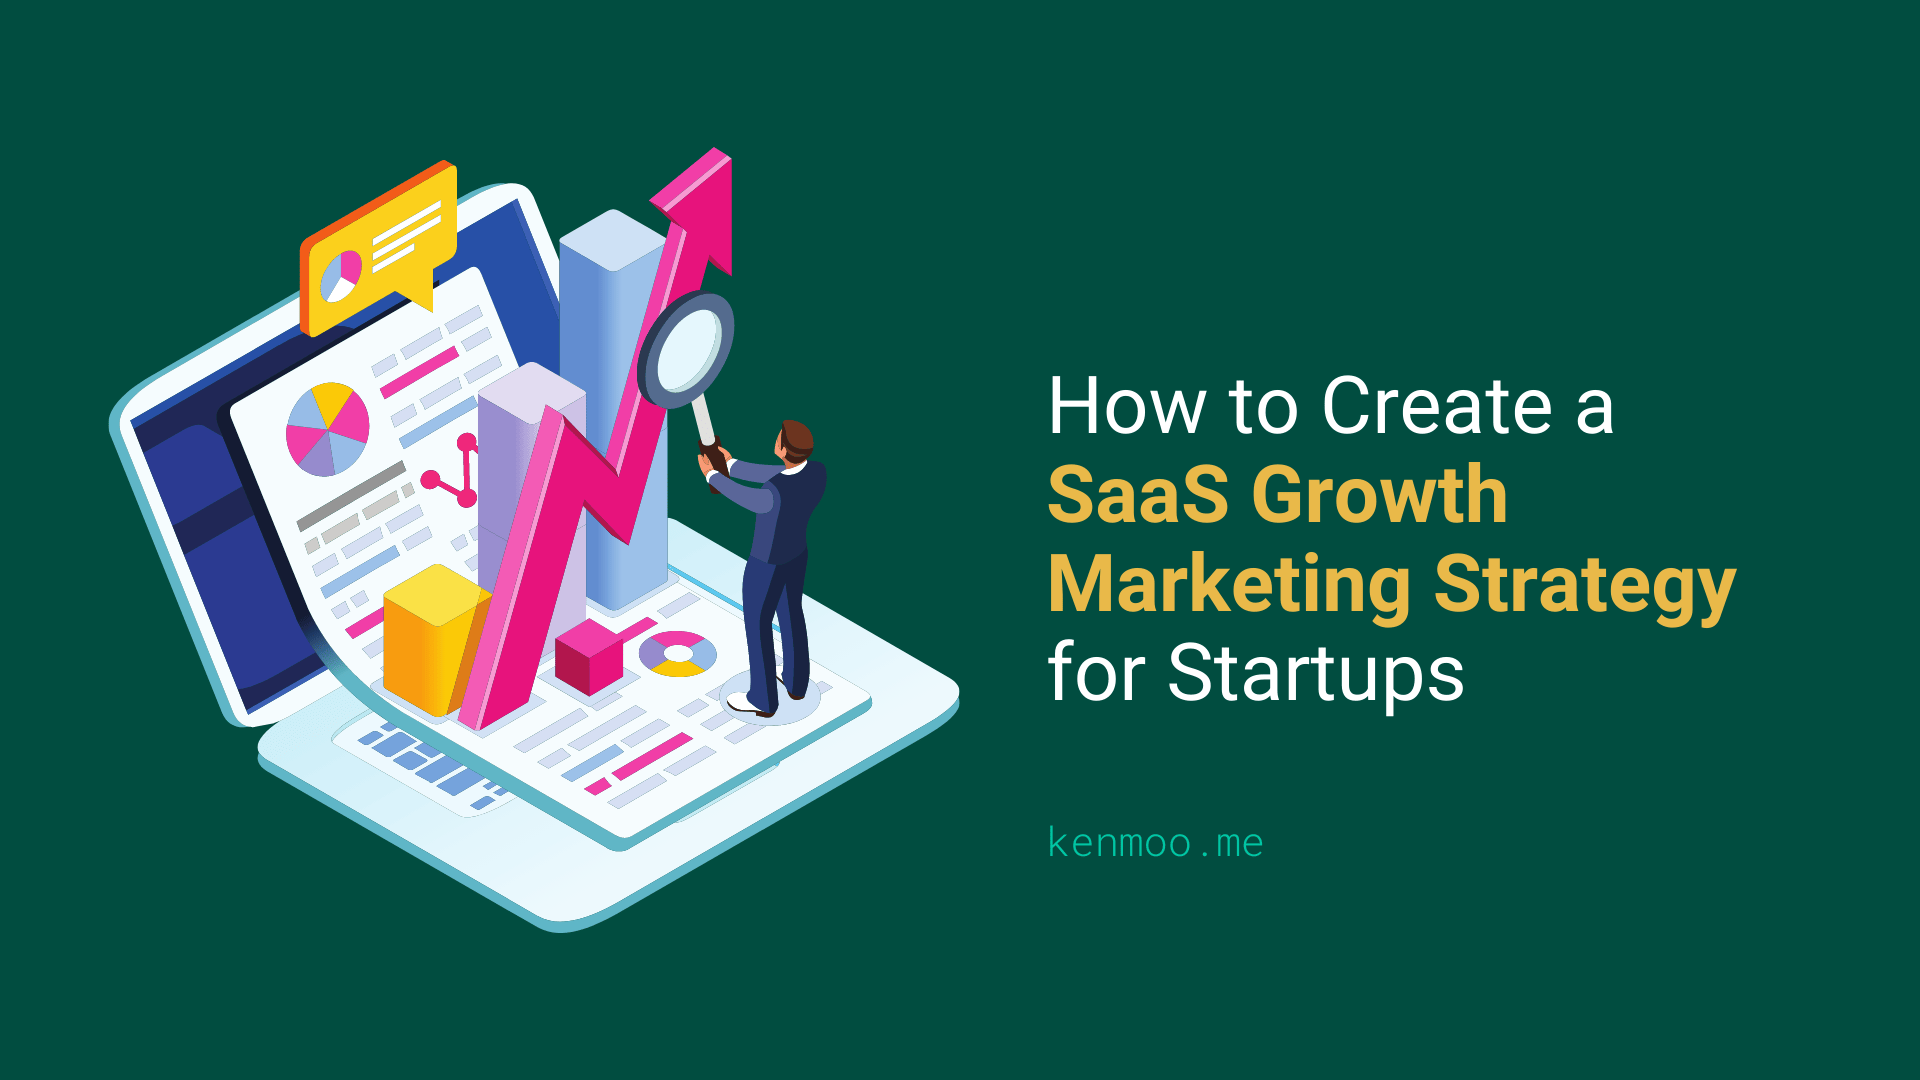 How to Create a SaaS Growth Marketing Strategy for Startups